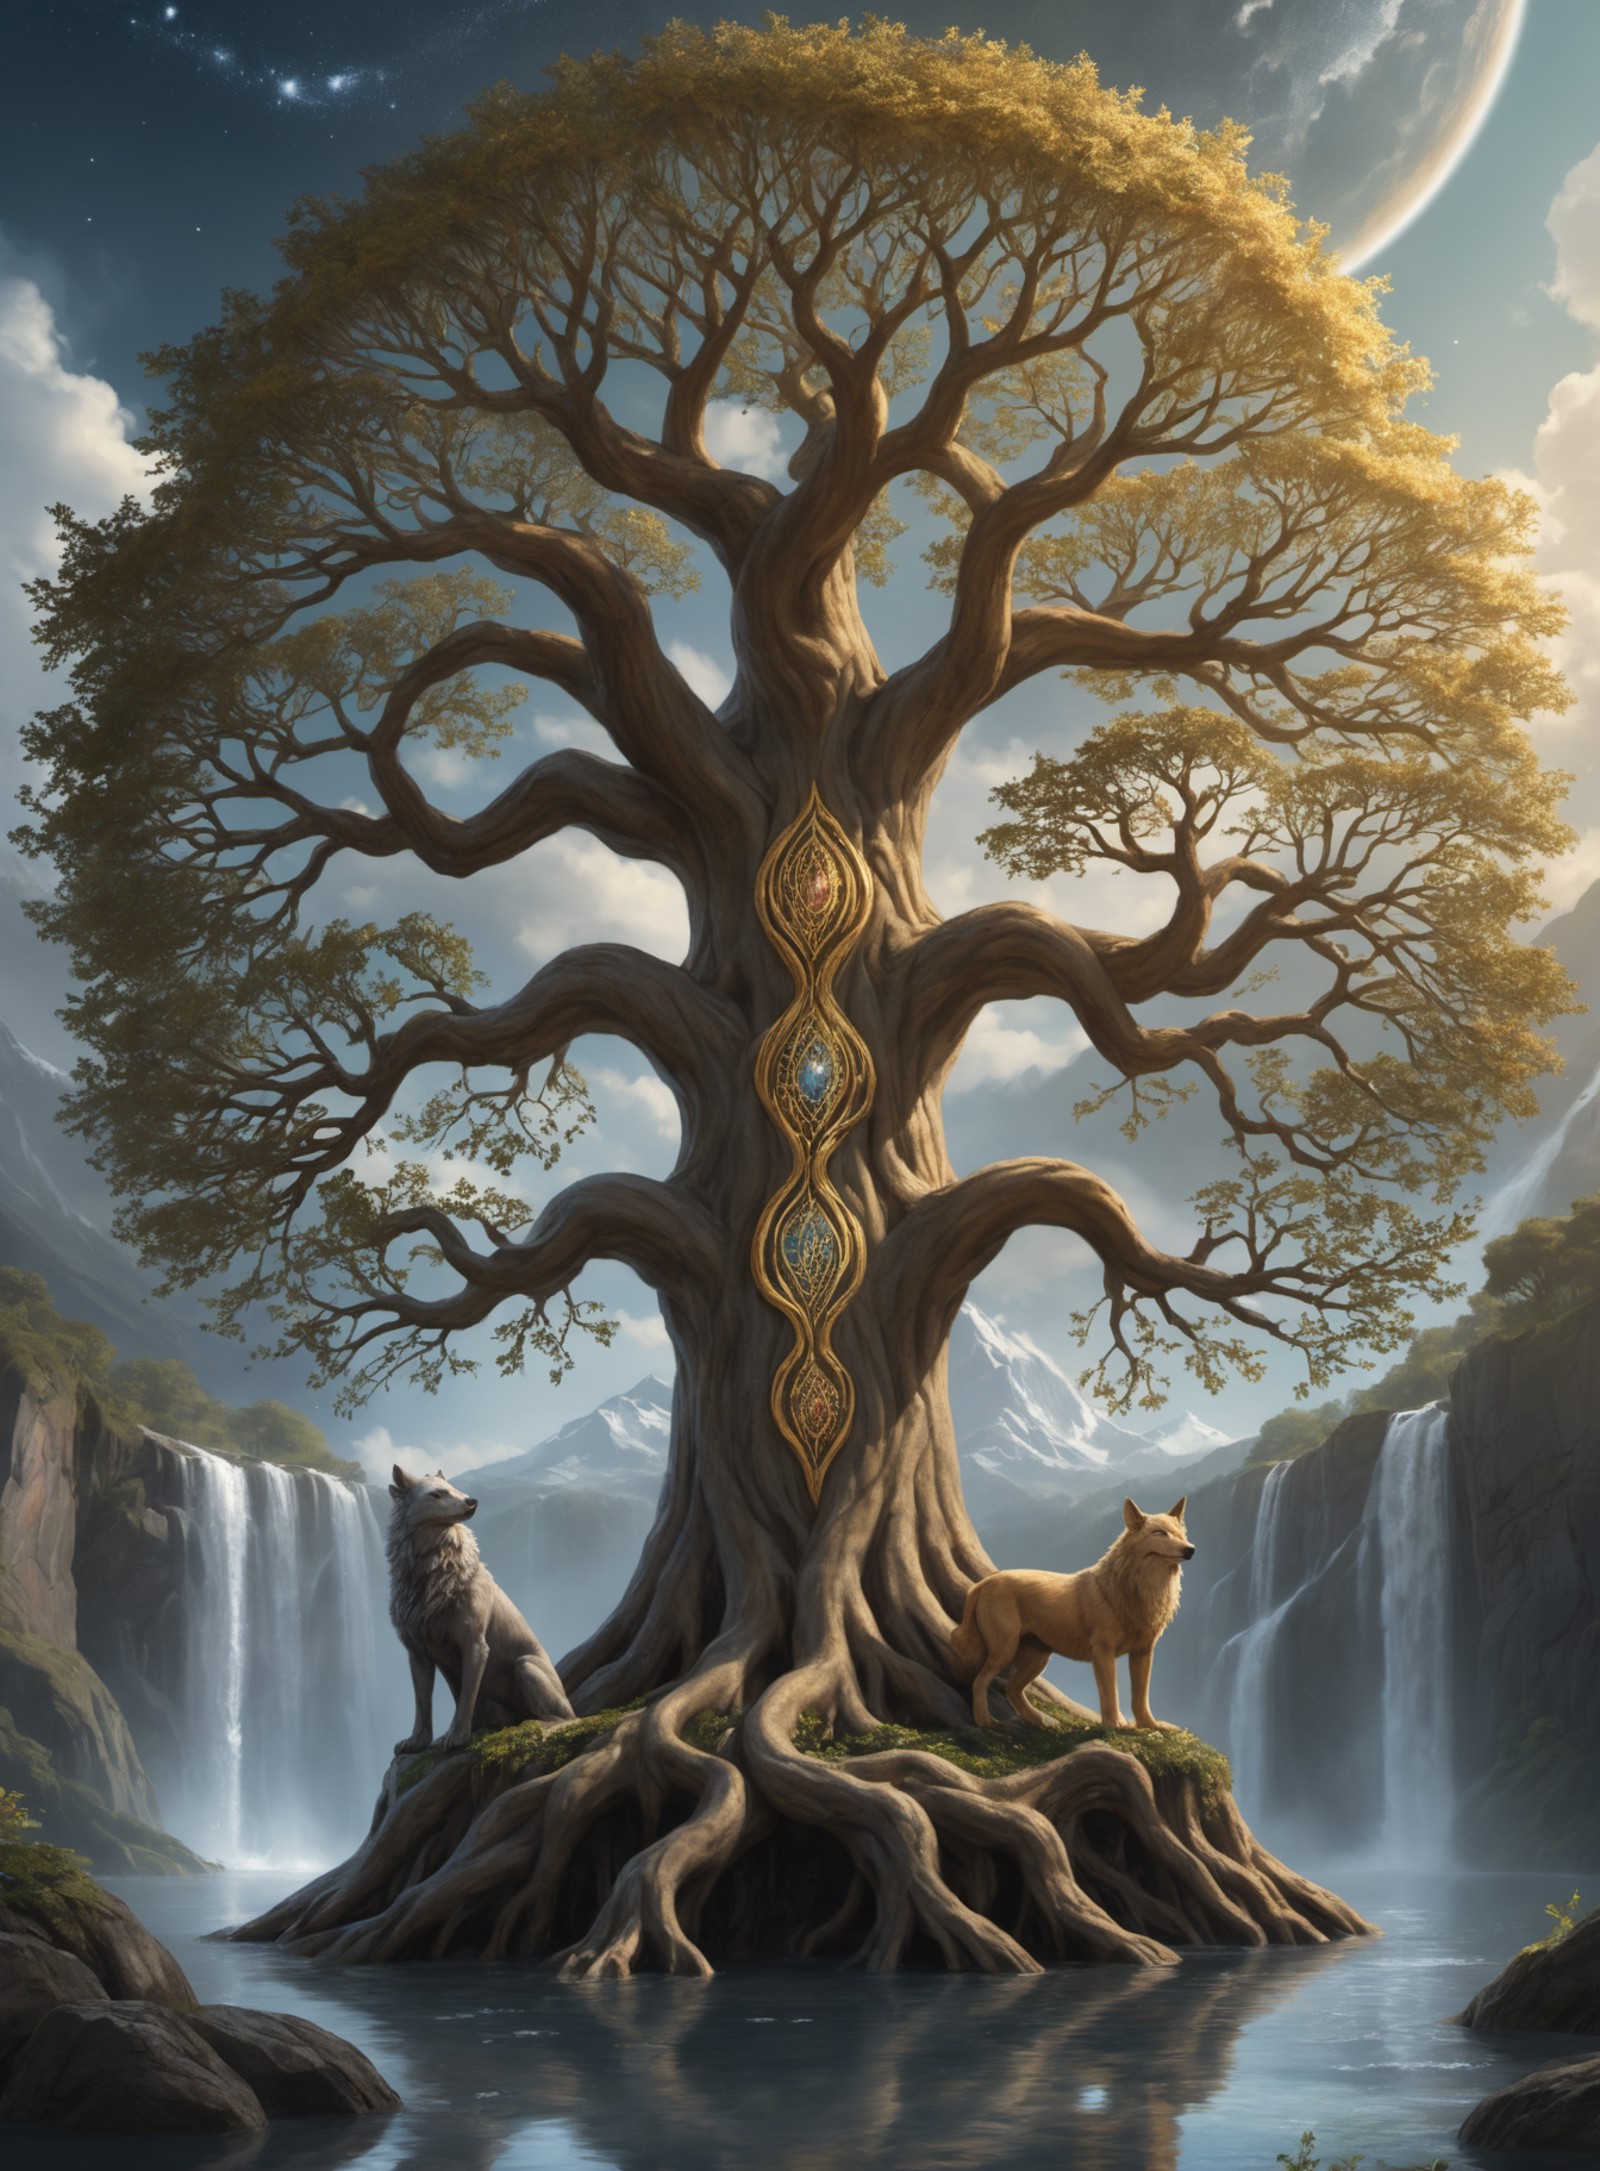 The paintingof the legendary Yggdrasil tree, reaching up towards the heavens with its sprawling branches adorned with leav...